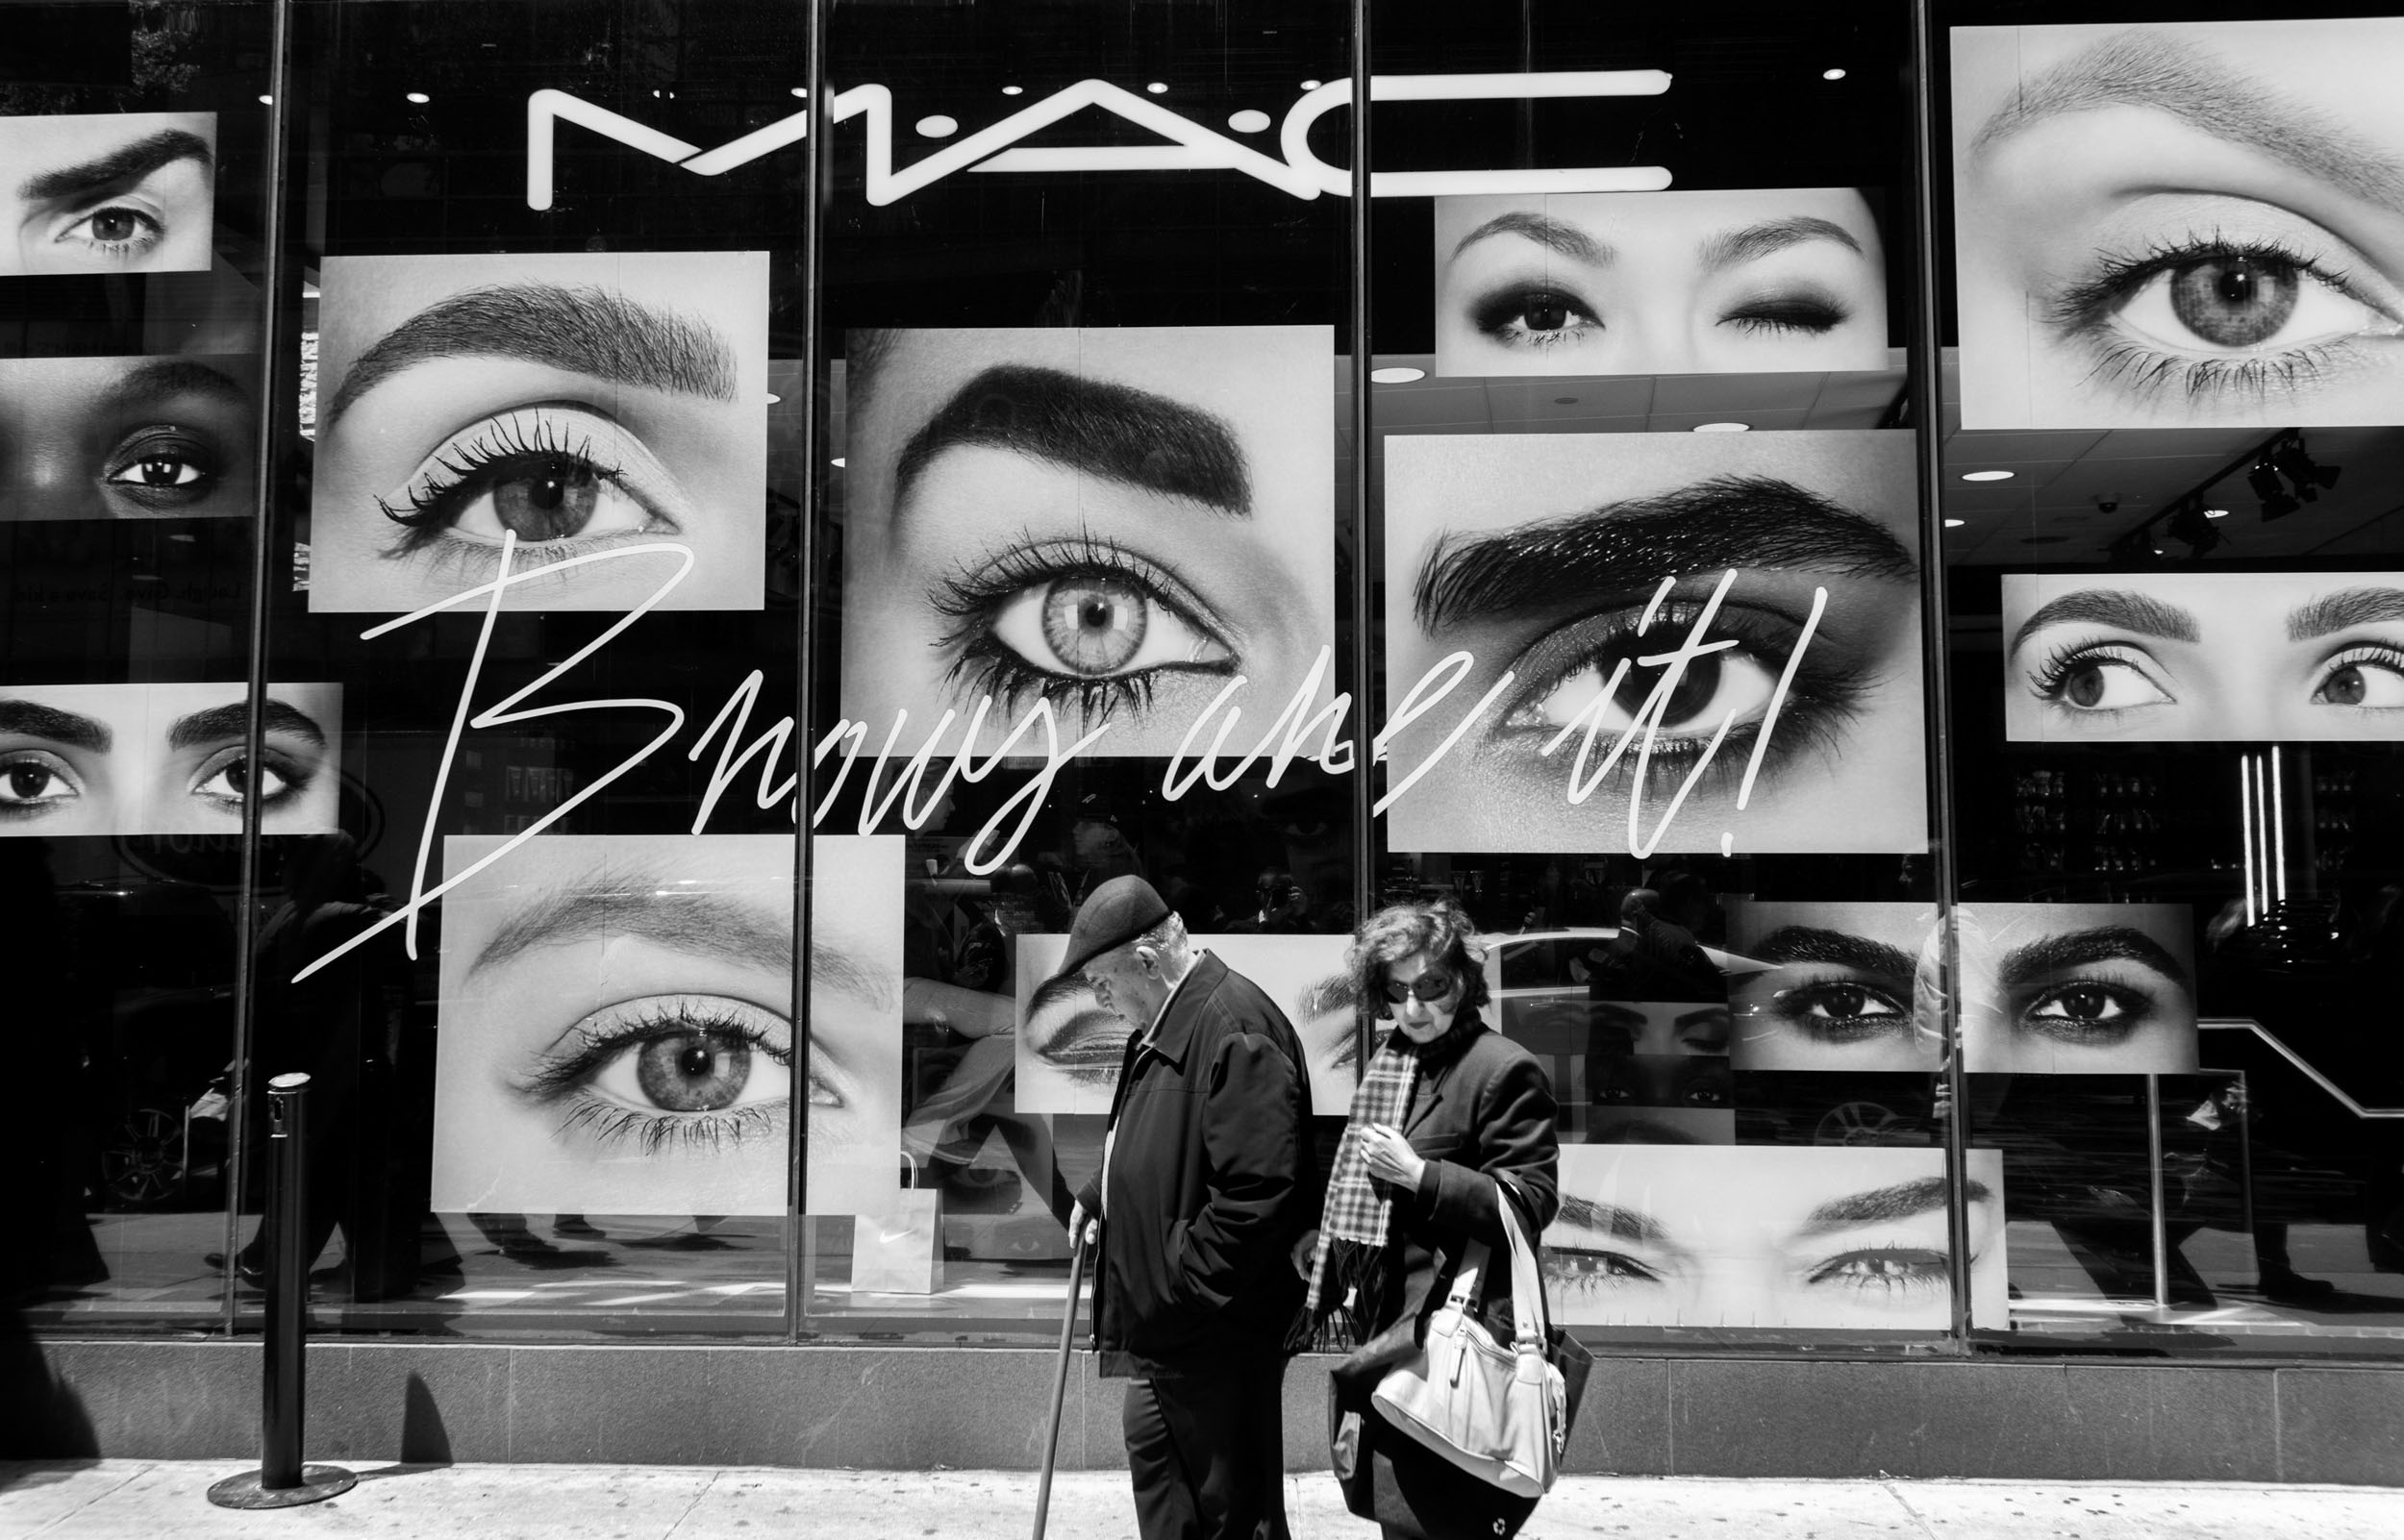 An older couple walks on a Manhattan sidewalk in front of pictures of large eyes at Mac Cosmetics.